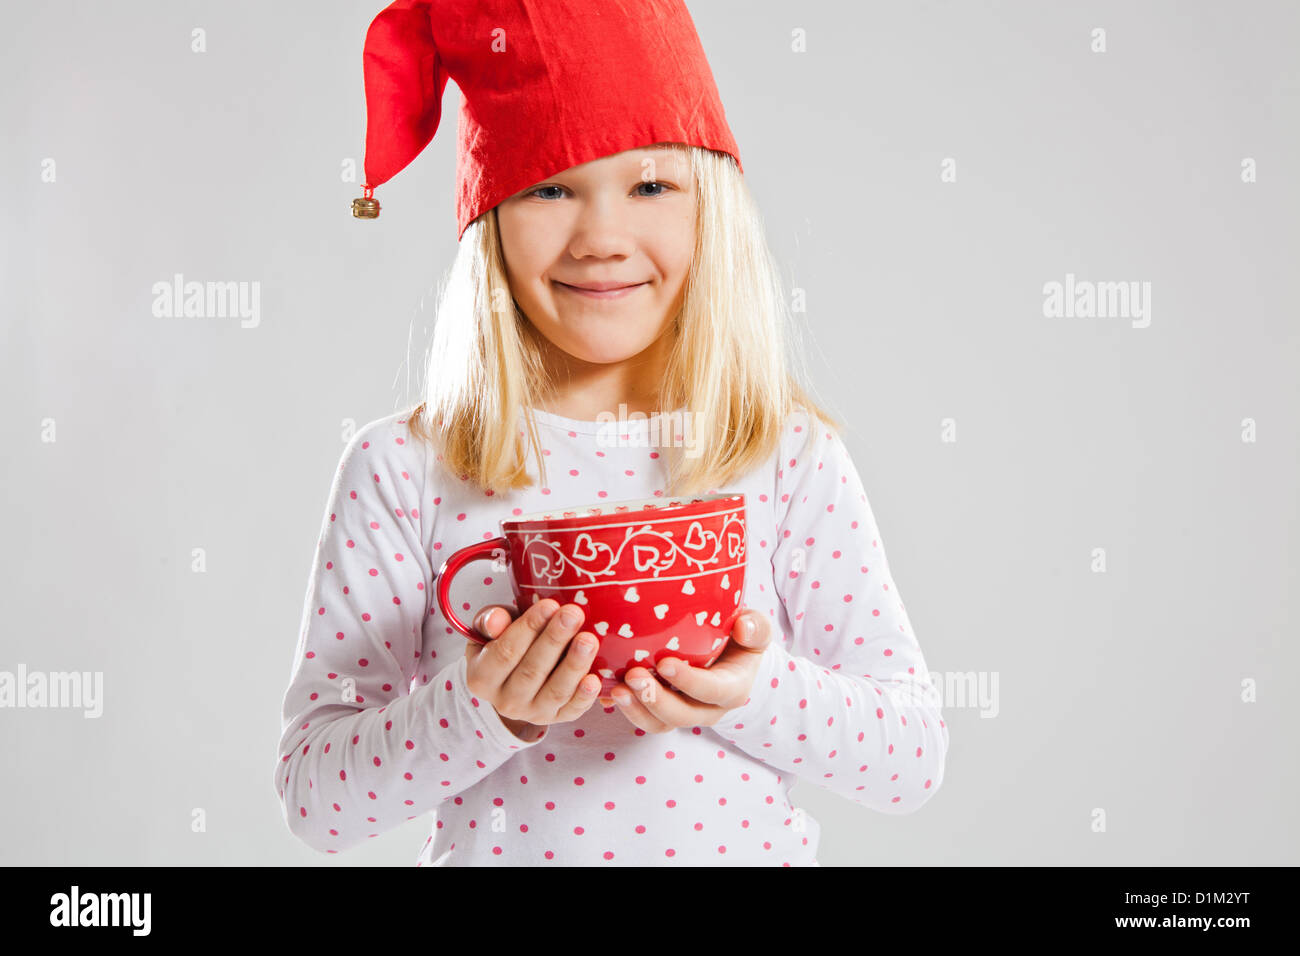 Studio portrait of happy young girl wearing red Christmas elf hat and holding a big red cup Stock Photo